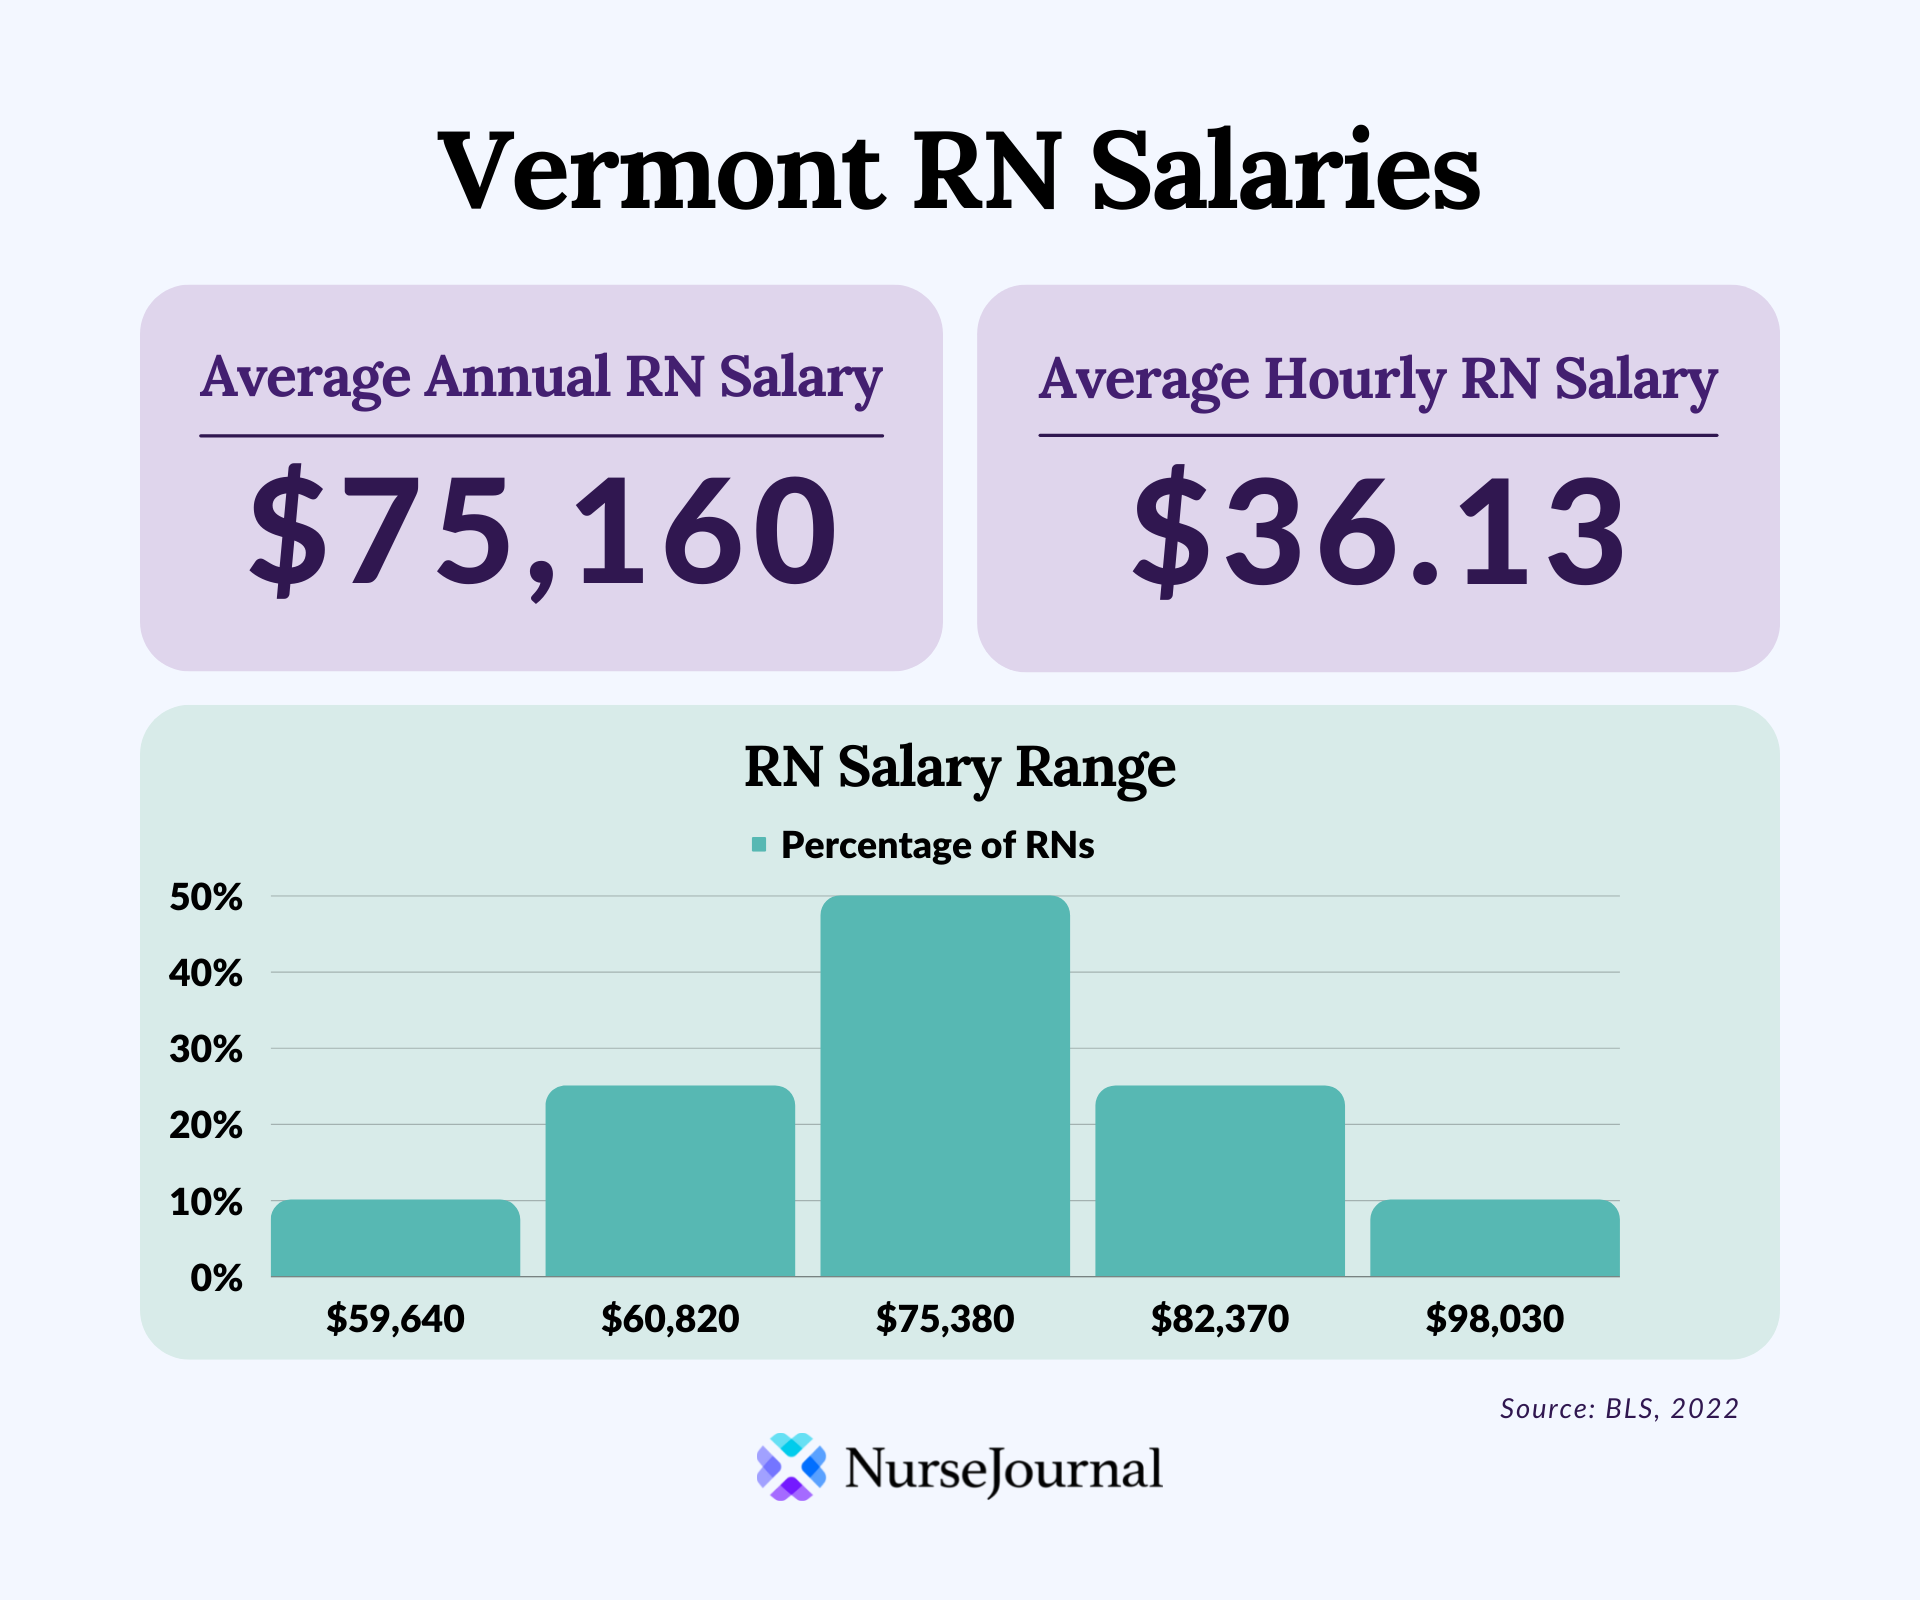 Infographic of registered nursing salary data in Vermont. The average annual RN salary is $75,160. The average hourly RN salary is $36.13. Average RN salaries range from $59,640 among the bottom 10th percentile of earners to $98,030 among the top 90th percentile of earners.